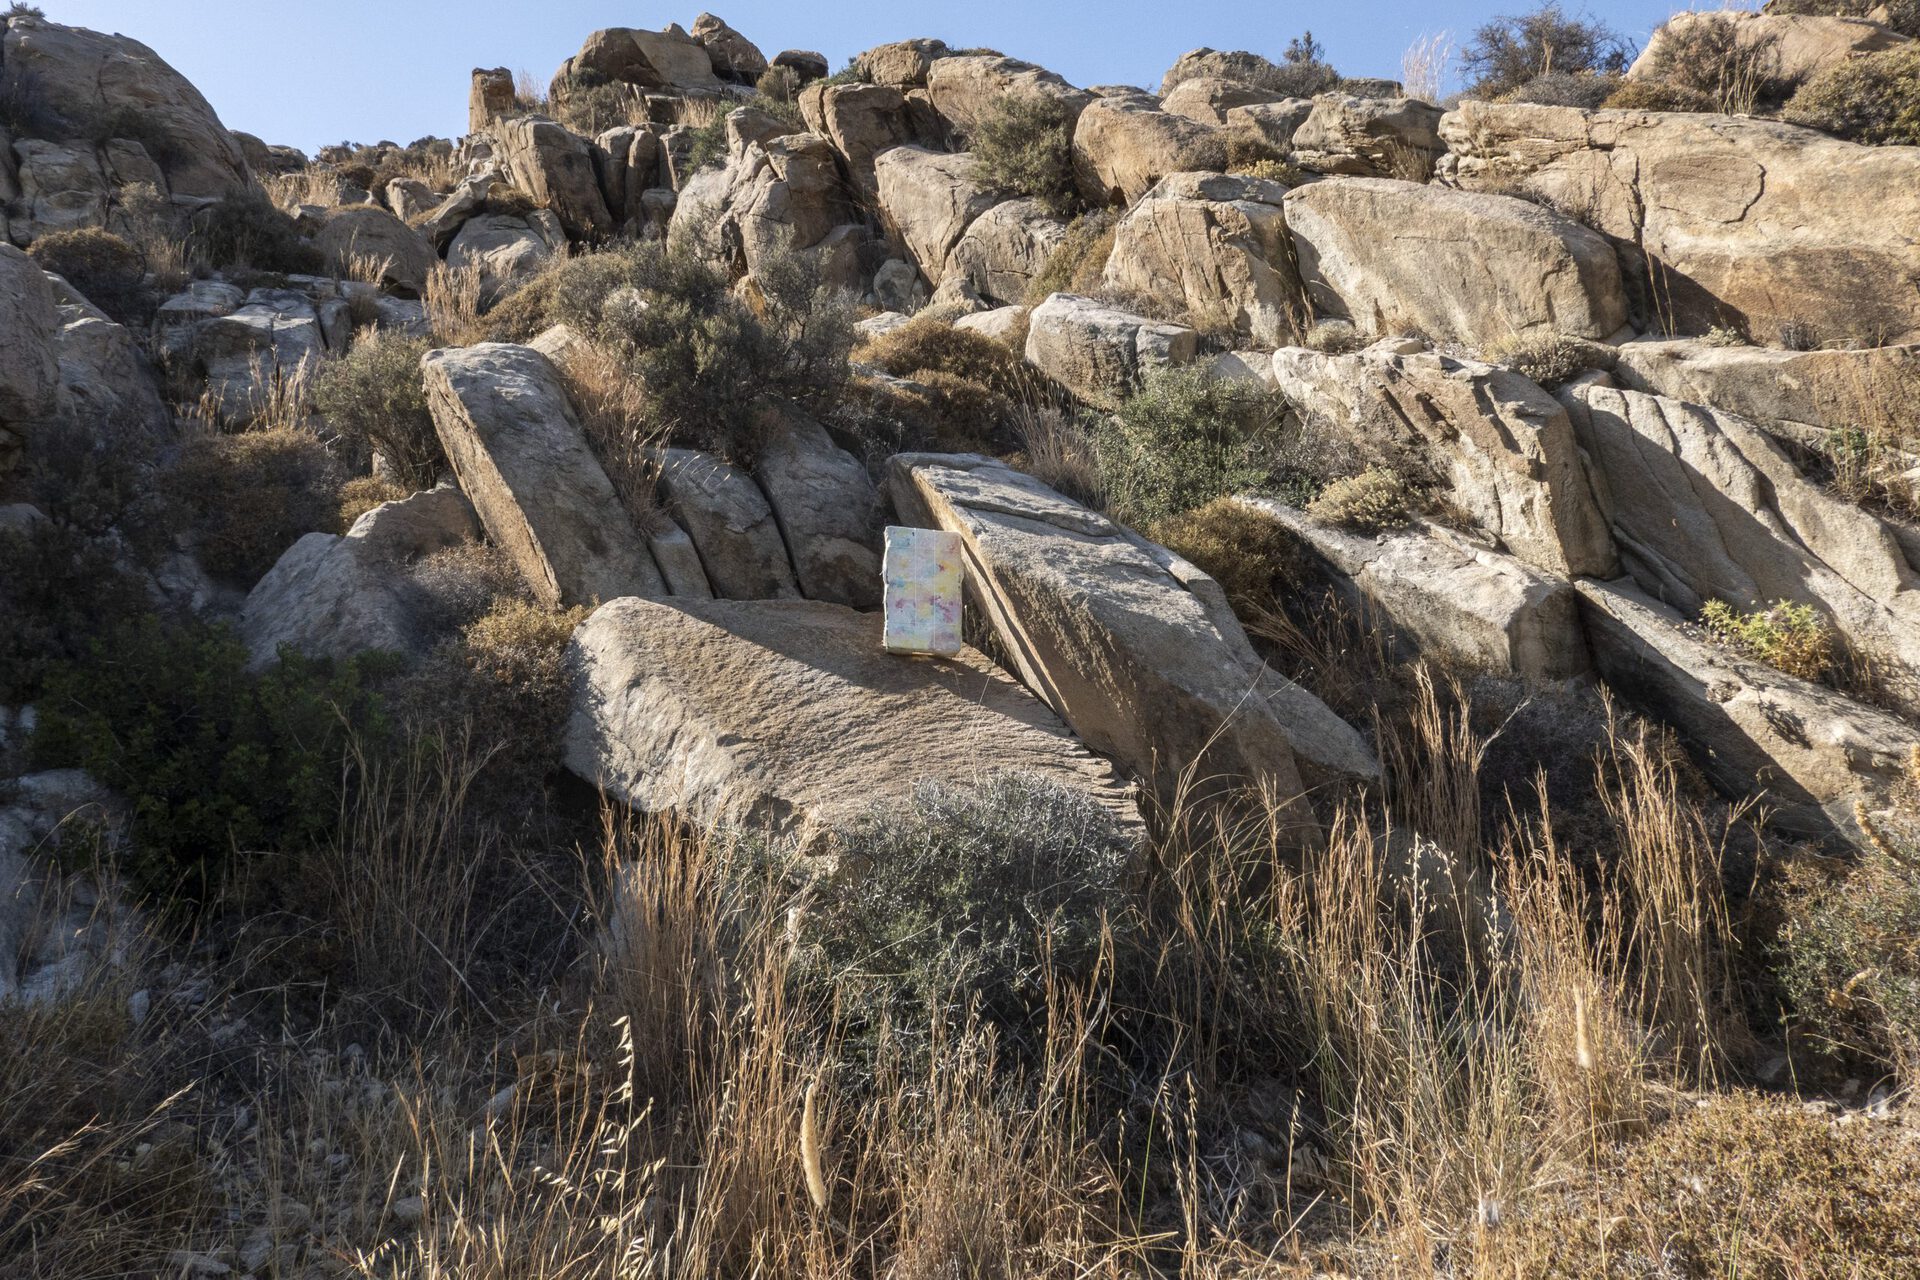 Ishai Shapira Kalter, "Seventh Stop: Kolymbithres", 2021. On the northwestern side, in Kolymbithres, the estate of the estates of Paros the artist presents one of his works on a rocky hillside.